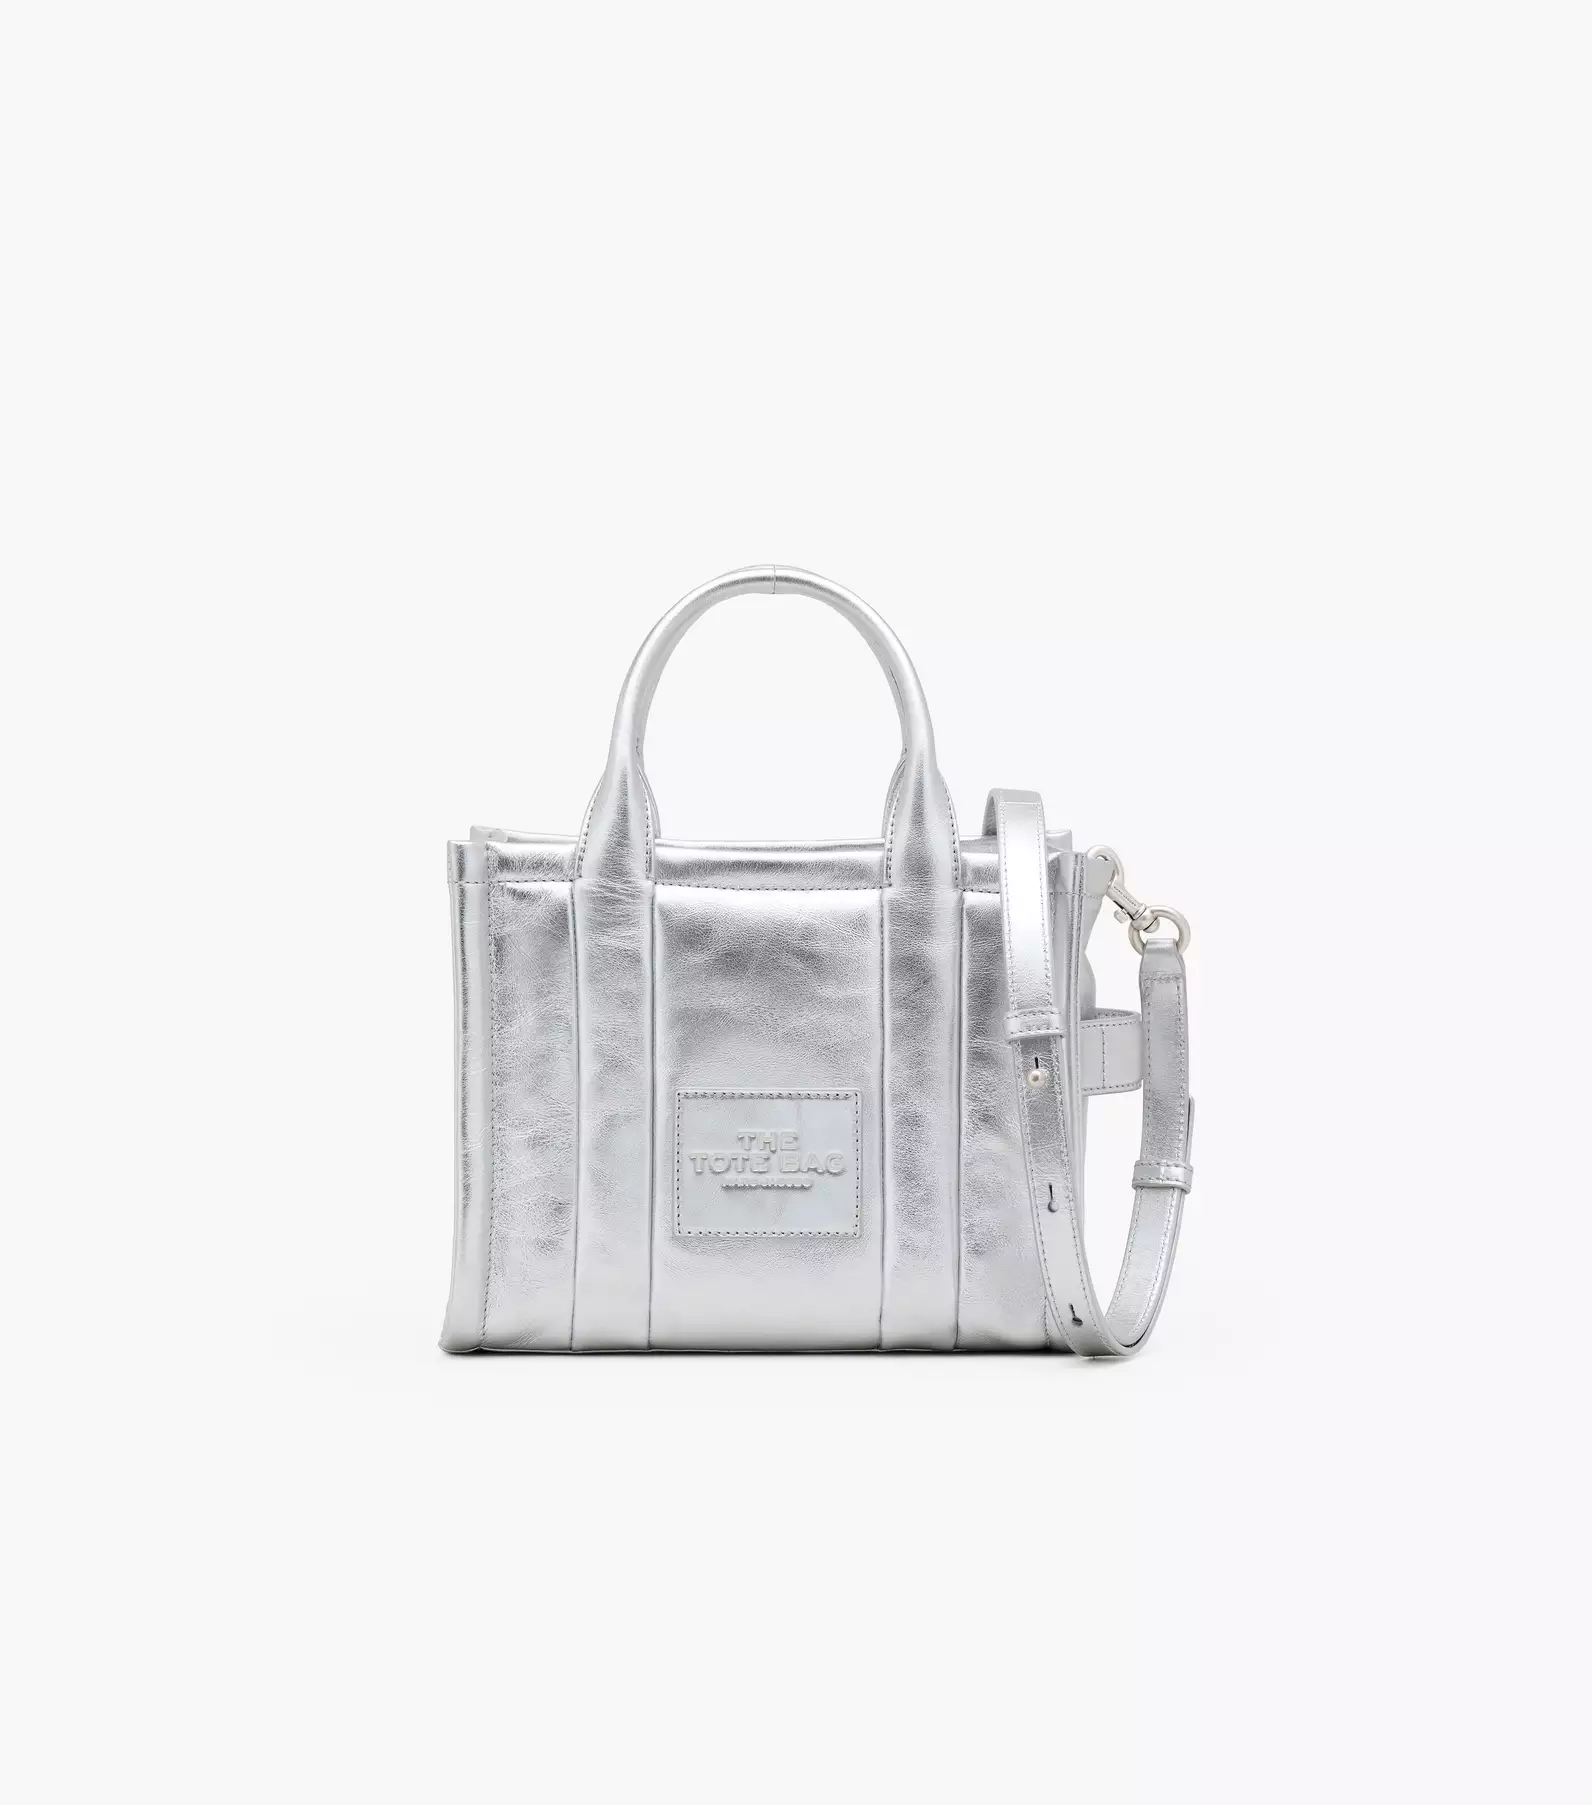 Rope-Handle Off-White Nylon Tote Bag with Zip-Top Closure - 18